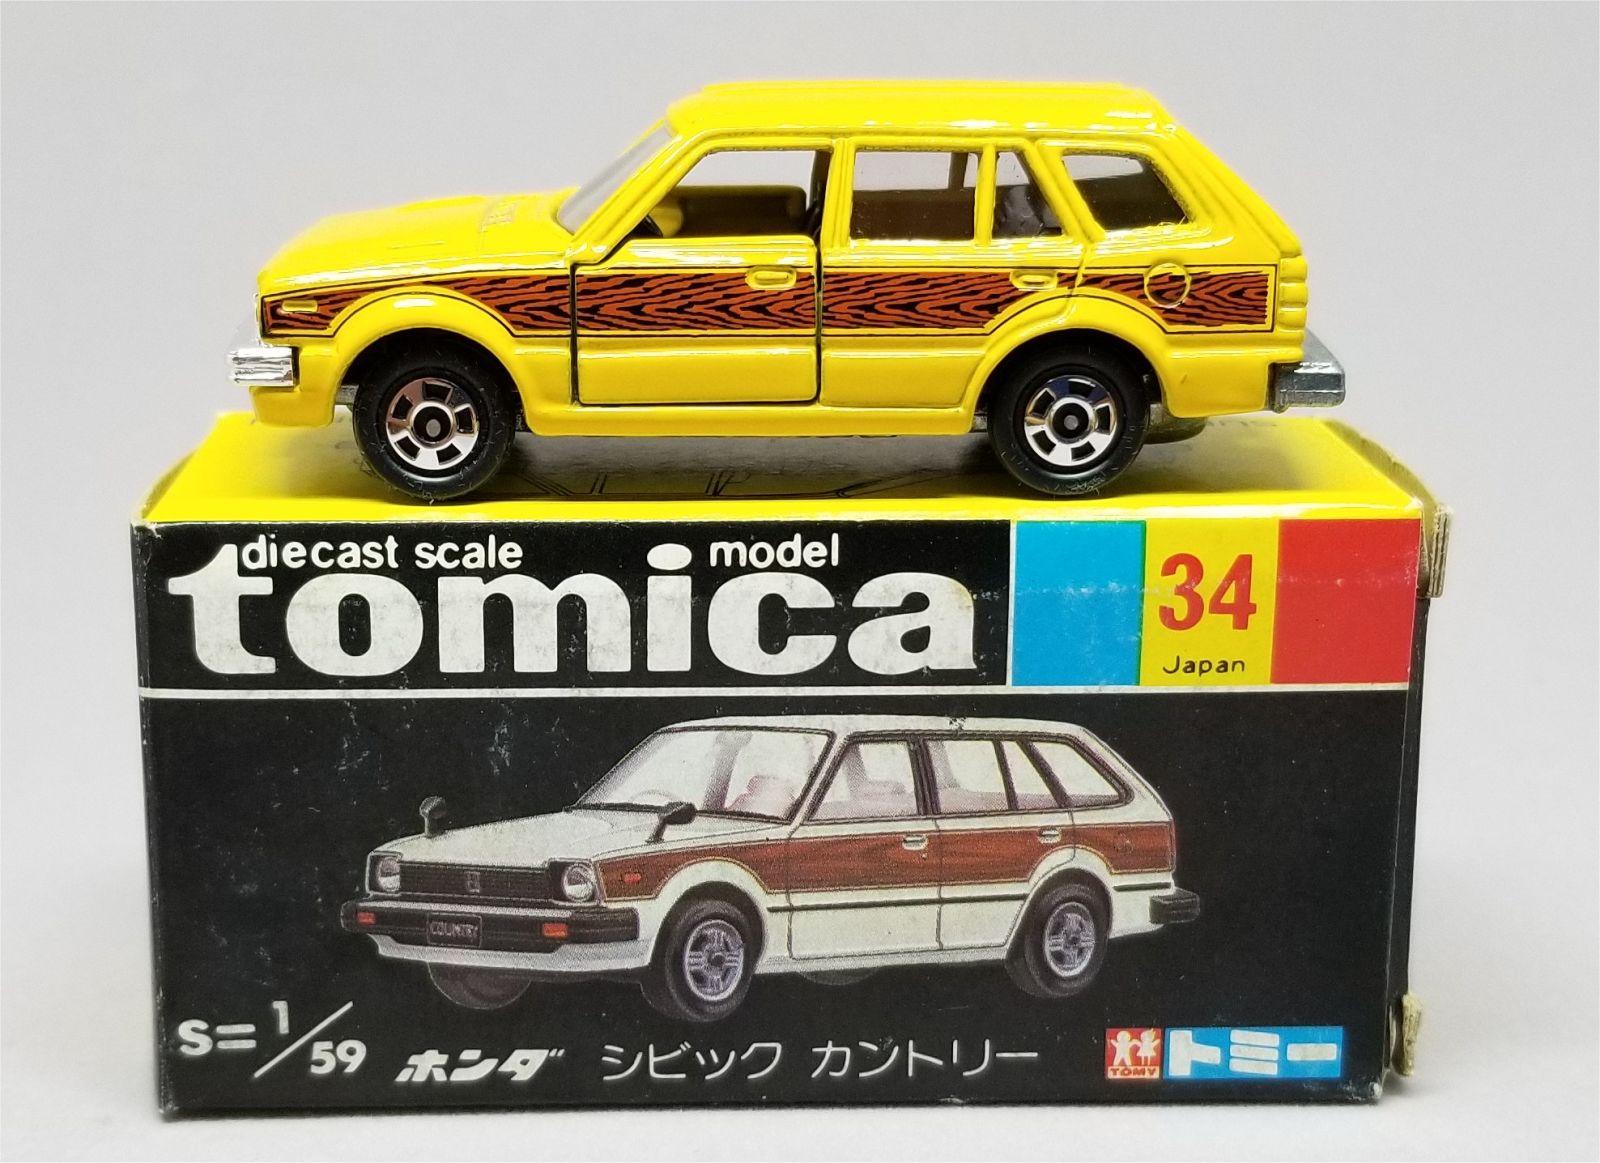 Illustration for article titled Radcast 2018: Tomica Honda Civic Country